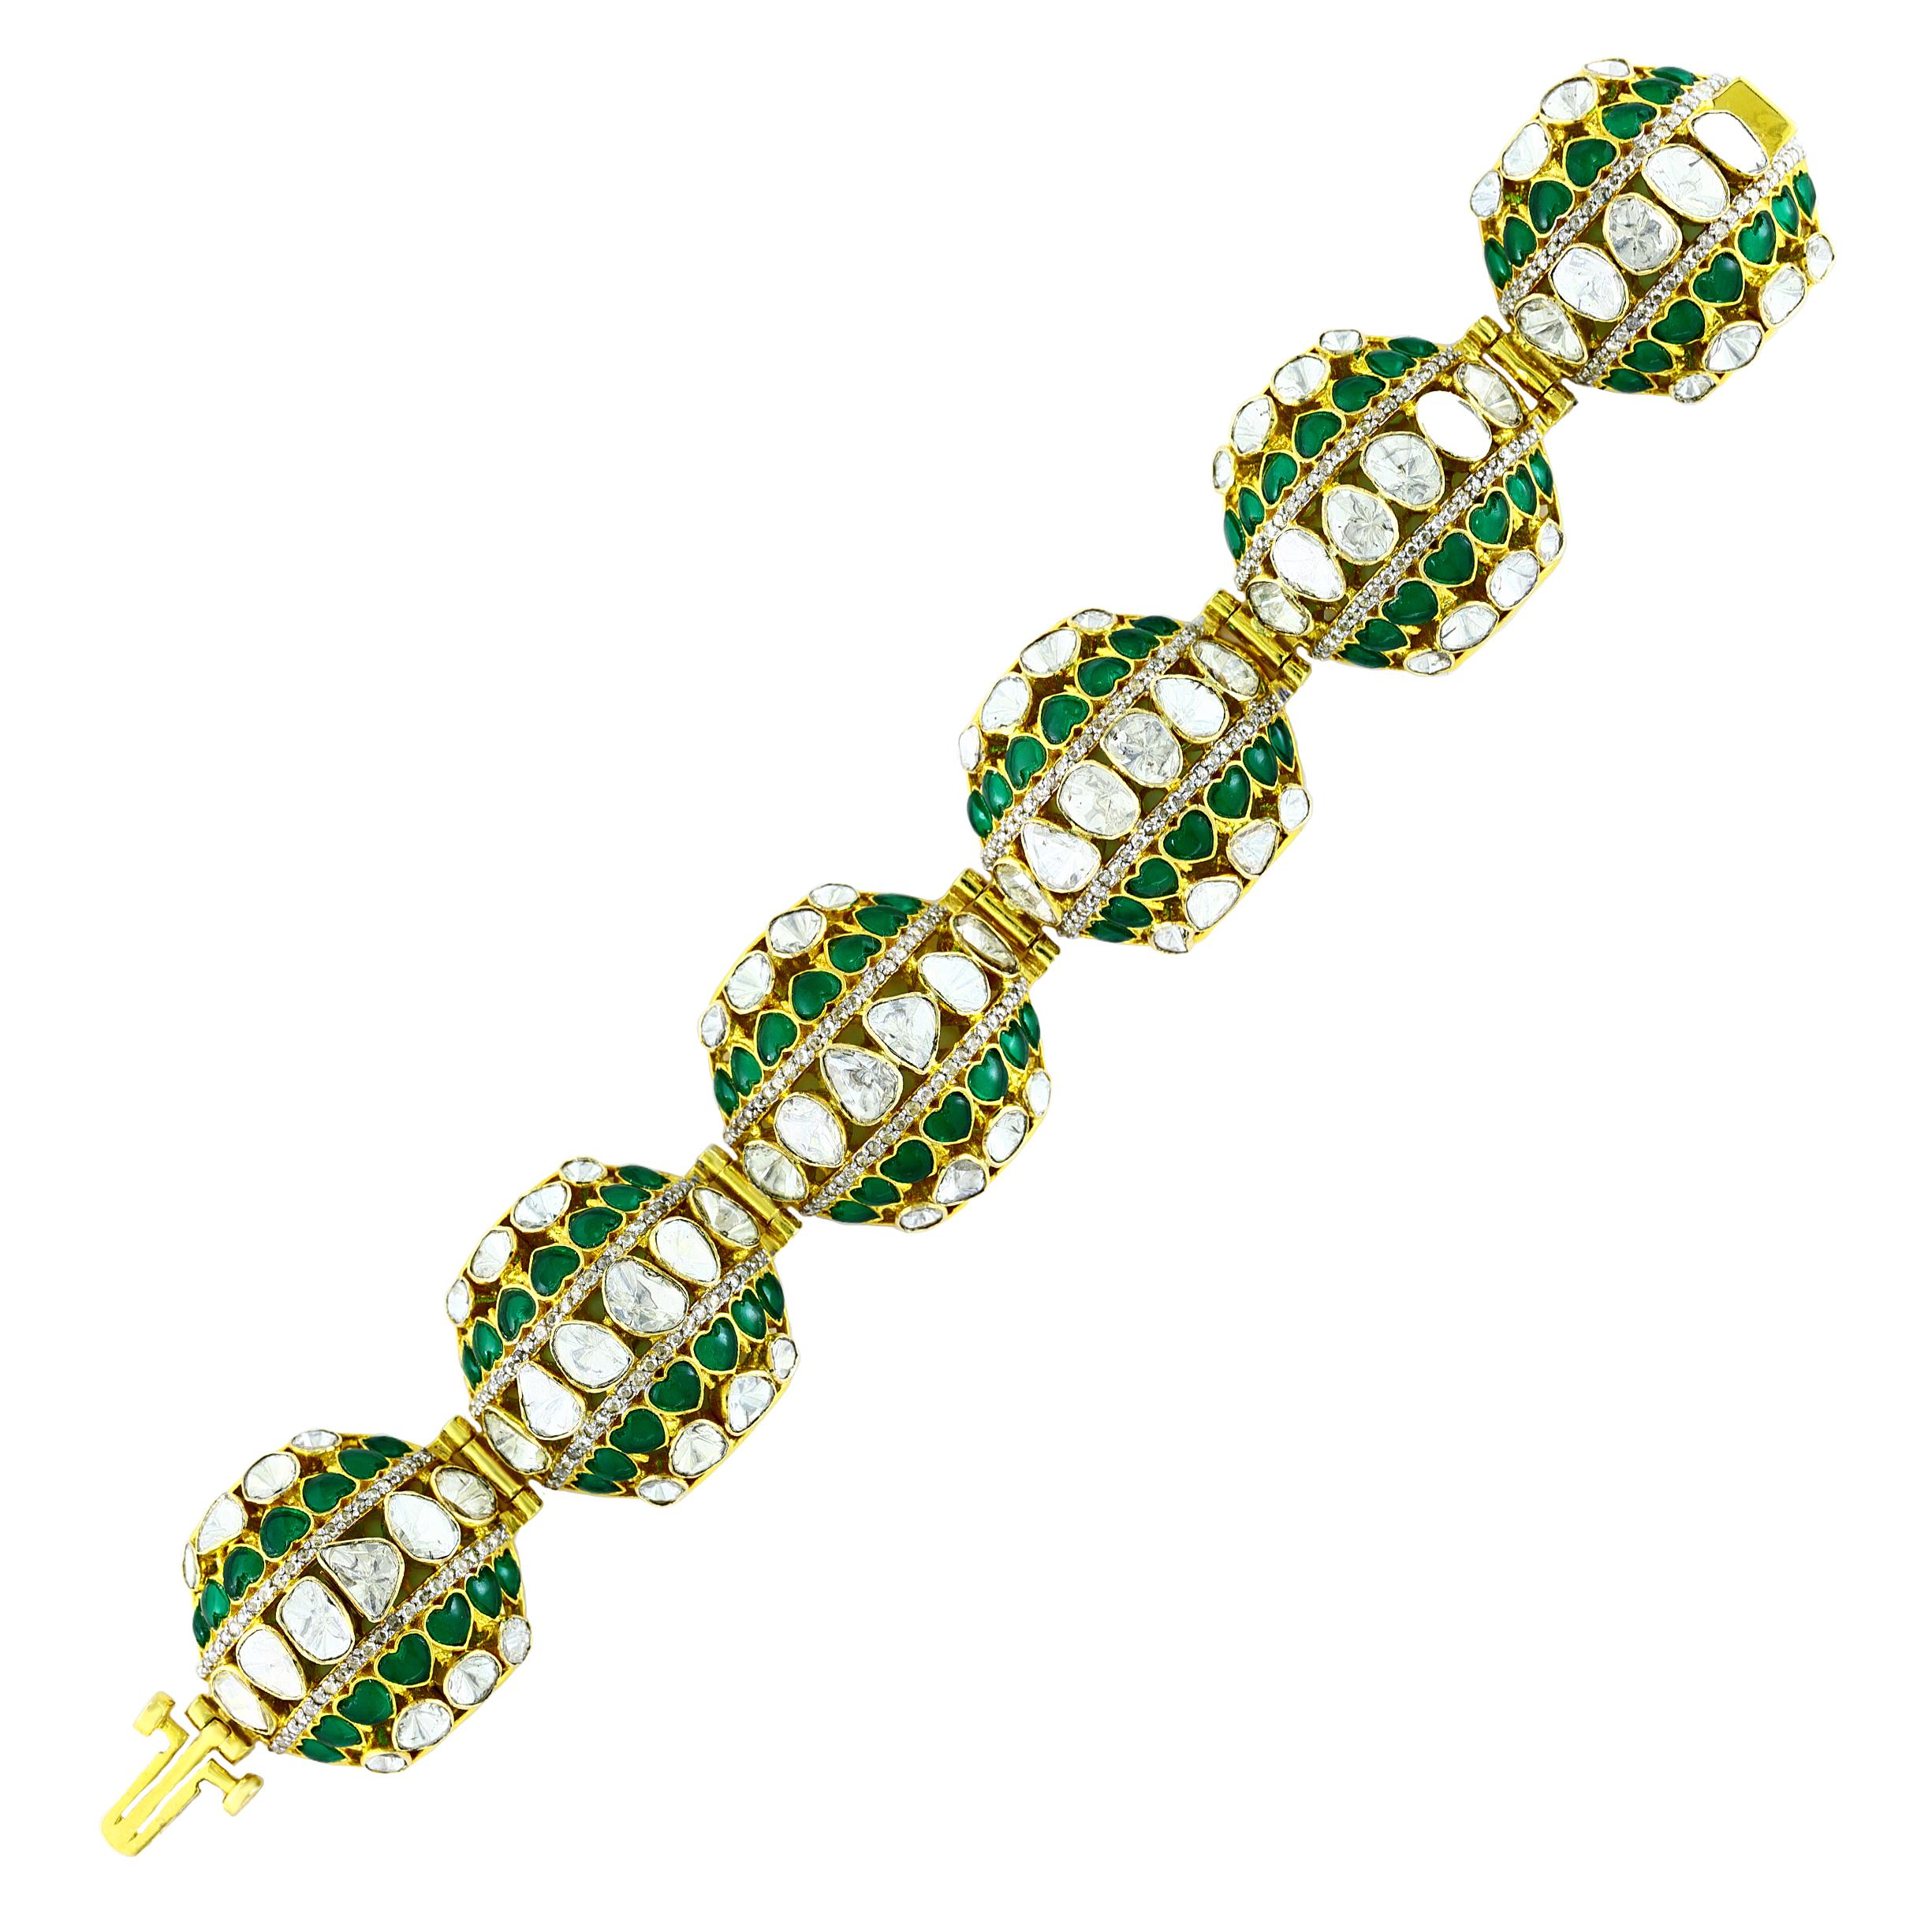 One of the best  bracelet you will come across
12 Carat Diamond  Bangle /Bracelet In 18 Karat Yellow Gold 58 Grams.
It features a bangle style  Bracelet crafted from an 18k Yellow gold and embedded with   all different shape of big  polki  diamonds